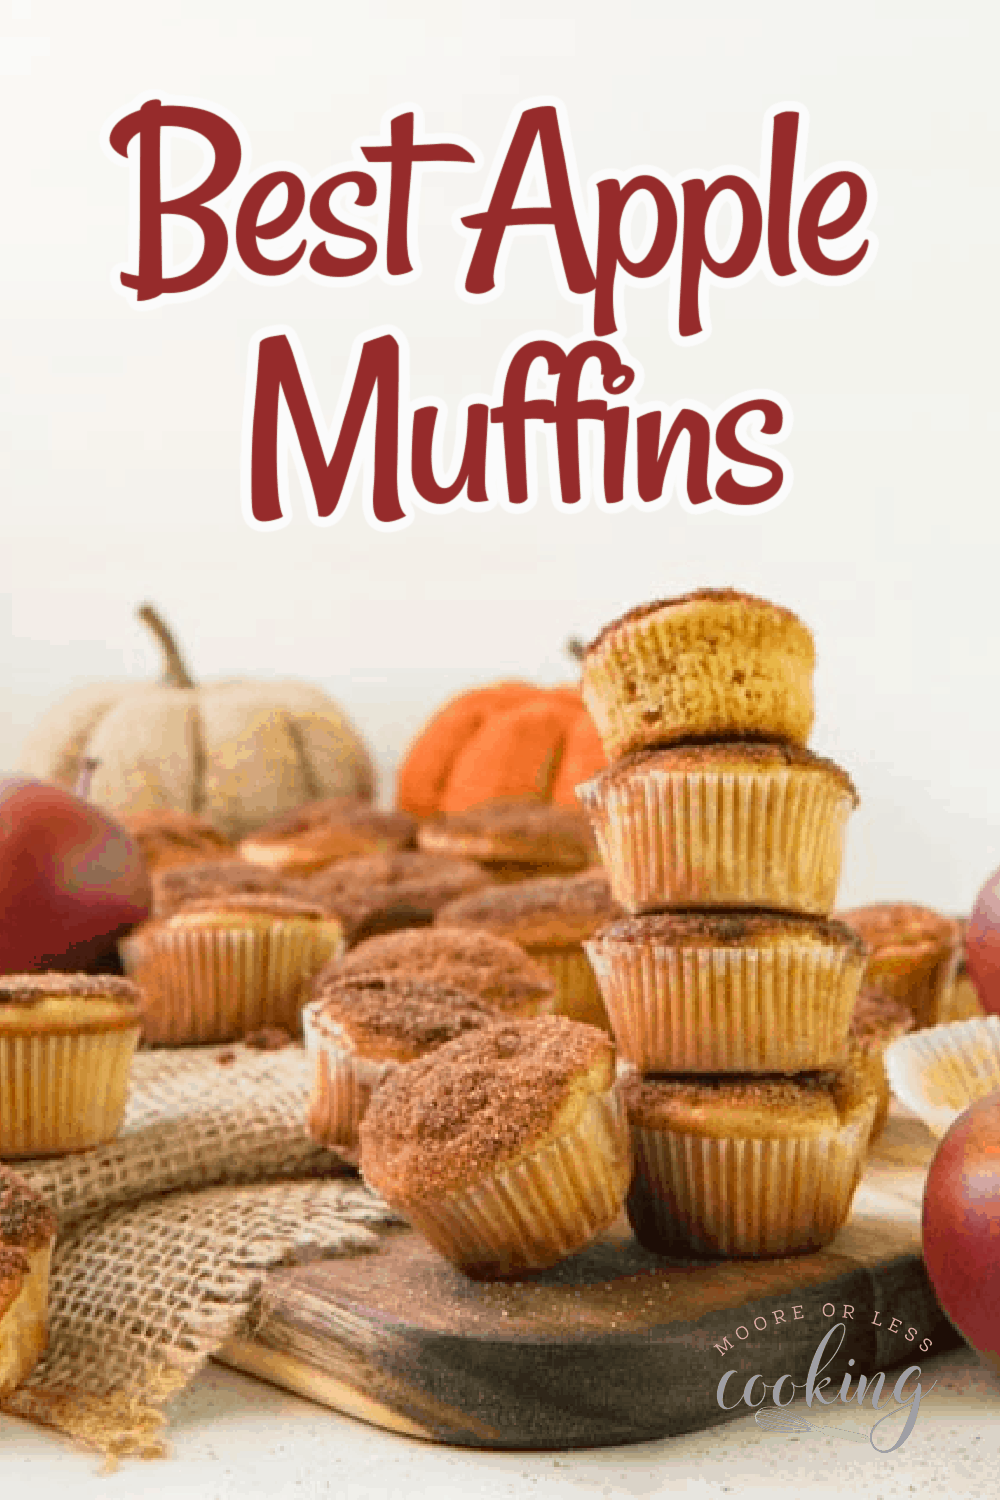 Enjoy Apple Muffins for the perfect Fall muffin recipe. These mini muffins bake nicely and are super addictive—great for bringing to parties or simply eating them with your family. via @Mooreorlesscook